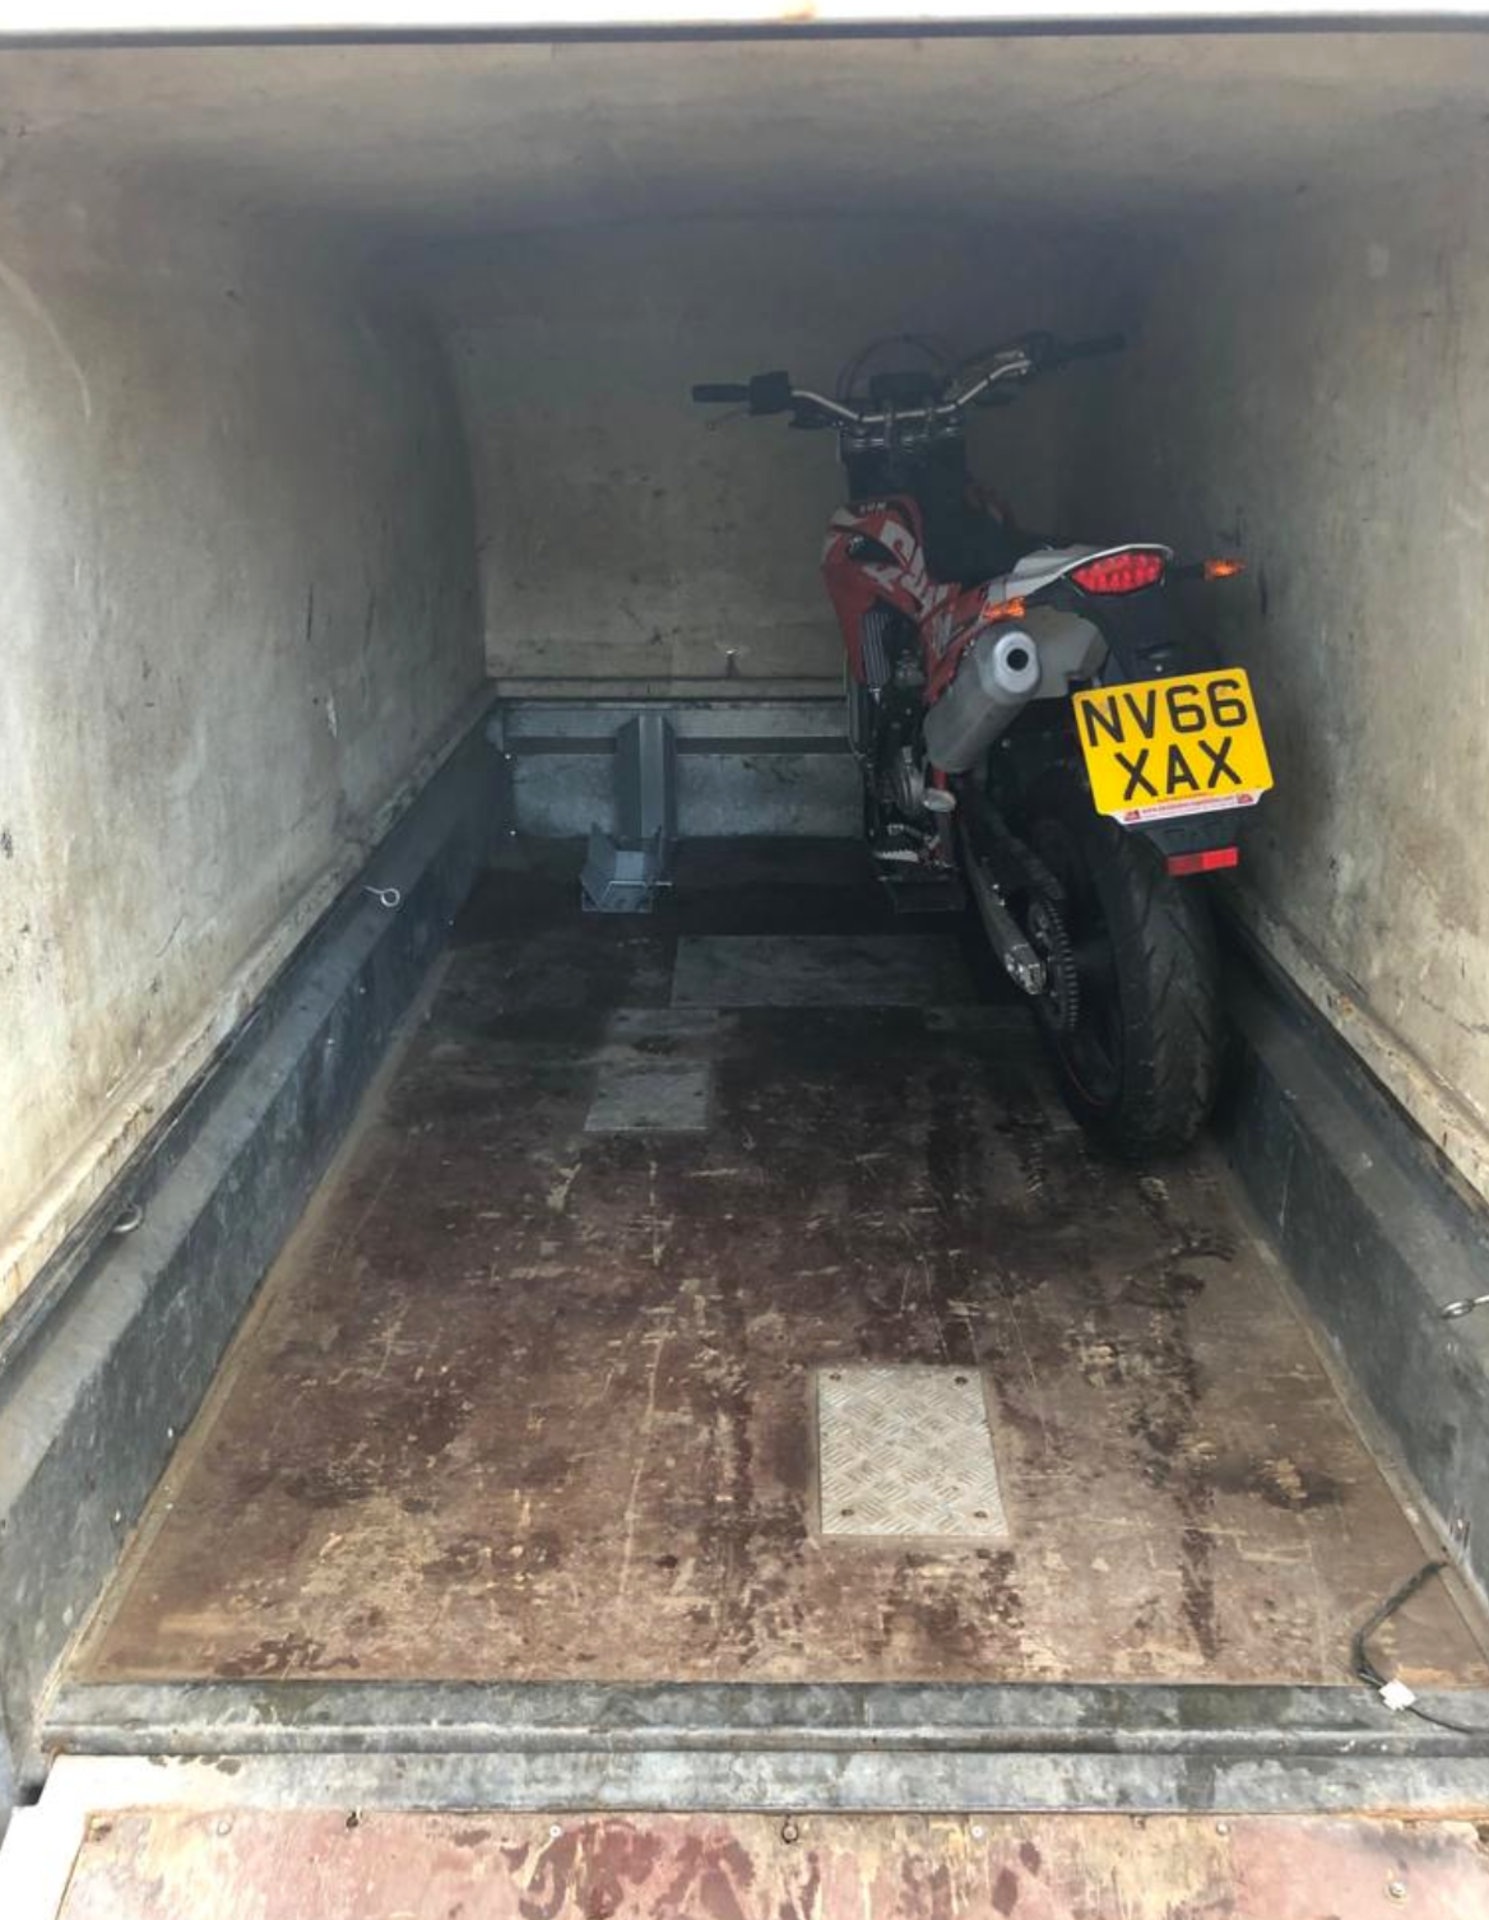 SPECIALIST SINGLE AXLE TOWABLE MOTORBIKE TRANSPORT COVERED TRAILER RAMP *PLUS VAT* - £1500 RESERVE! - Image 6 of 9